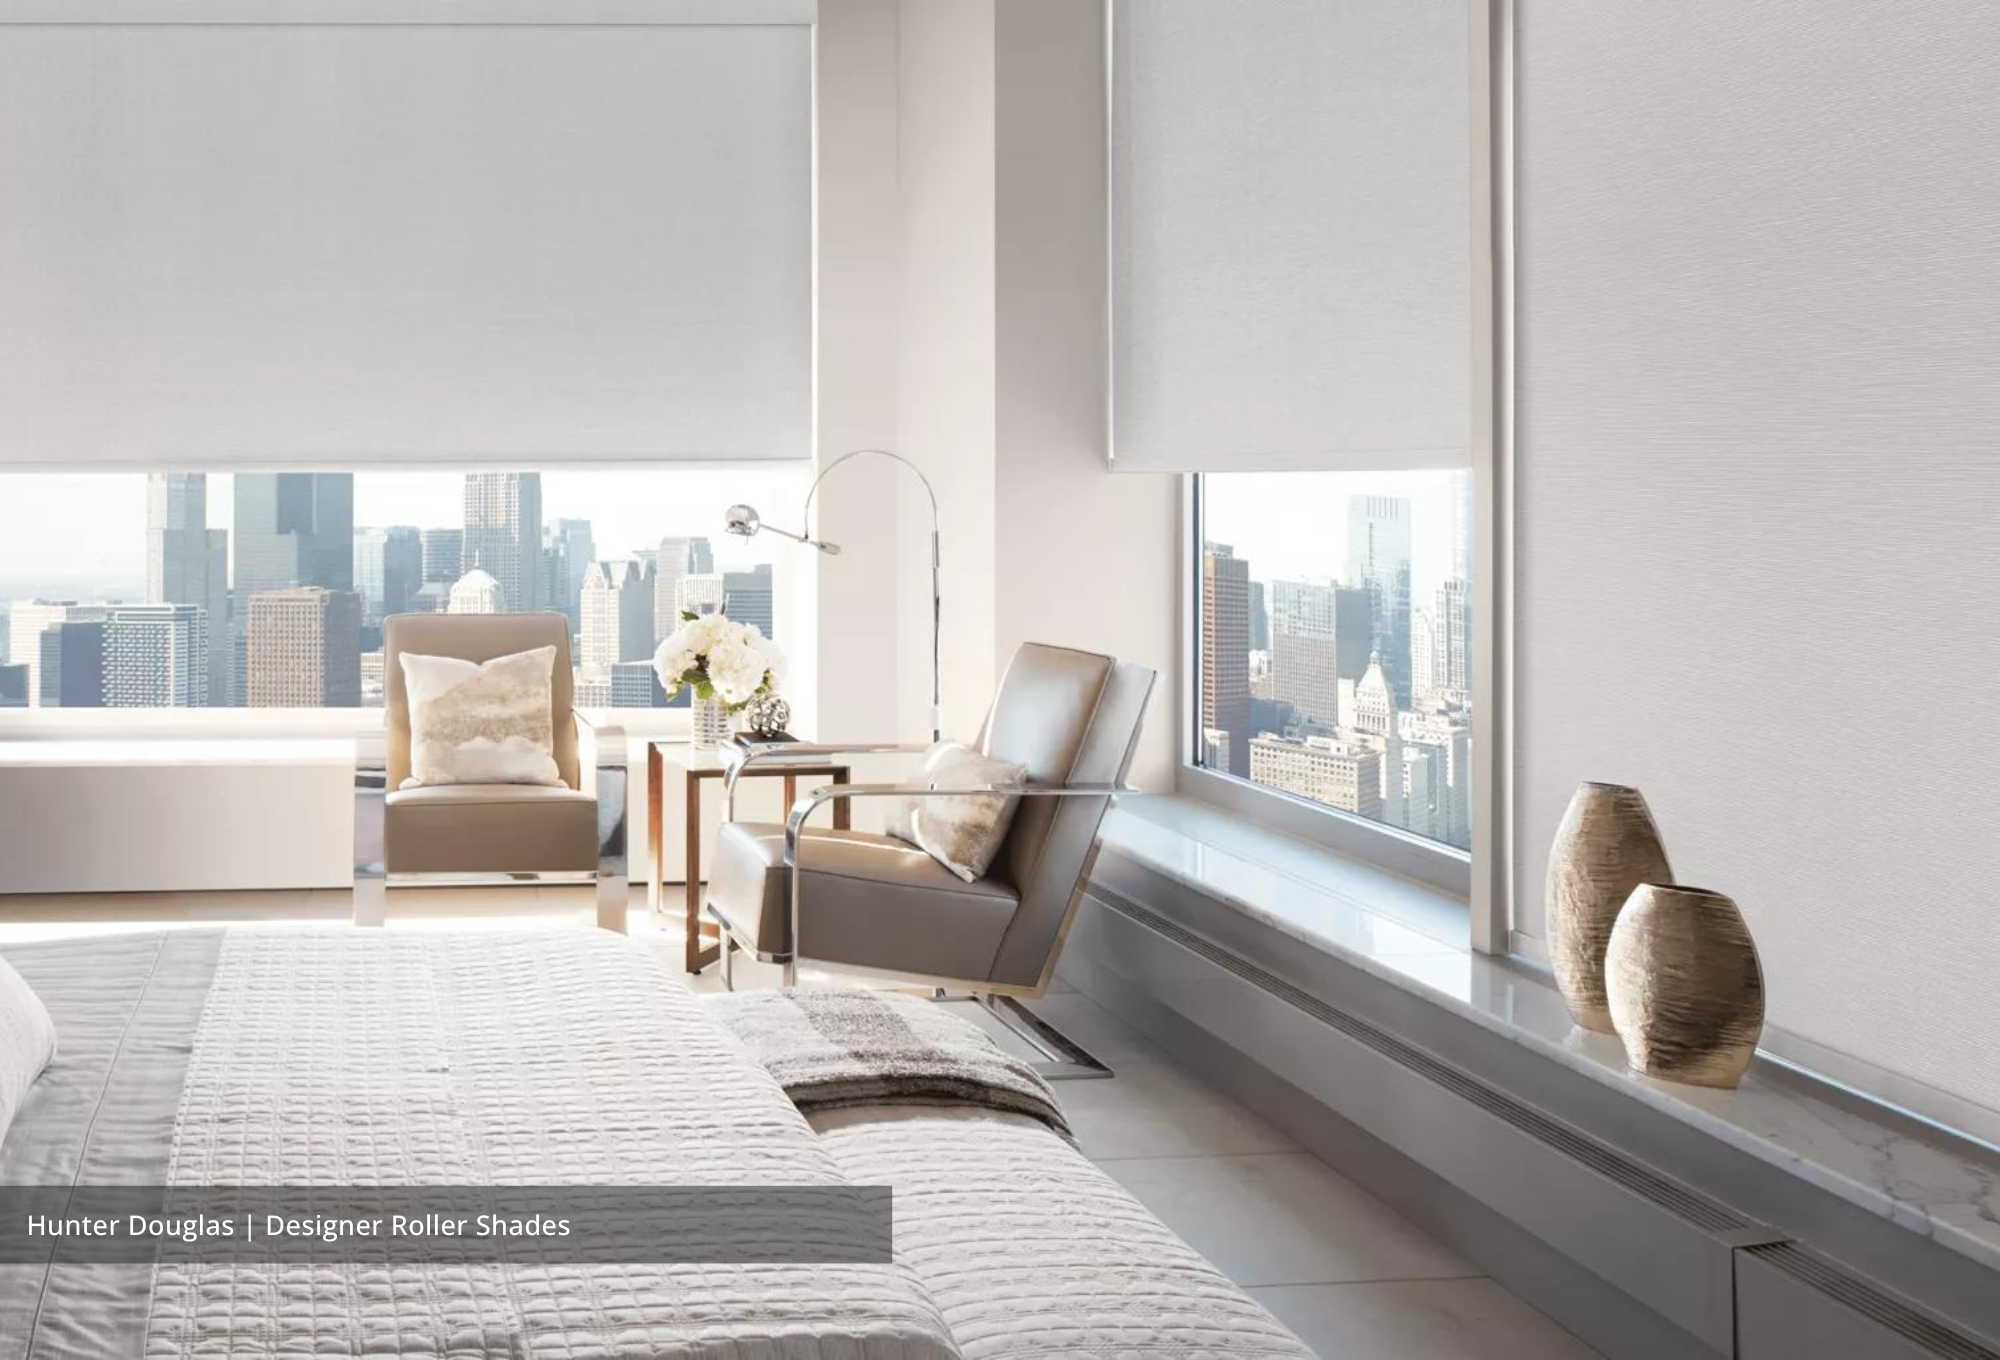 Hunter Douglas Roller Shades available at JC Licht